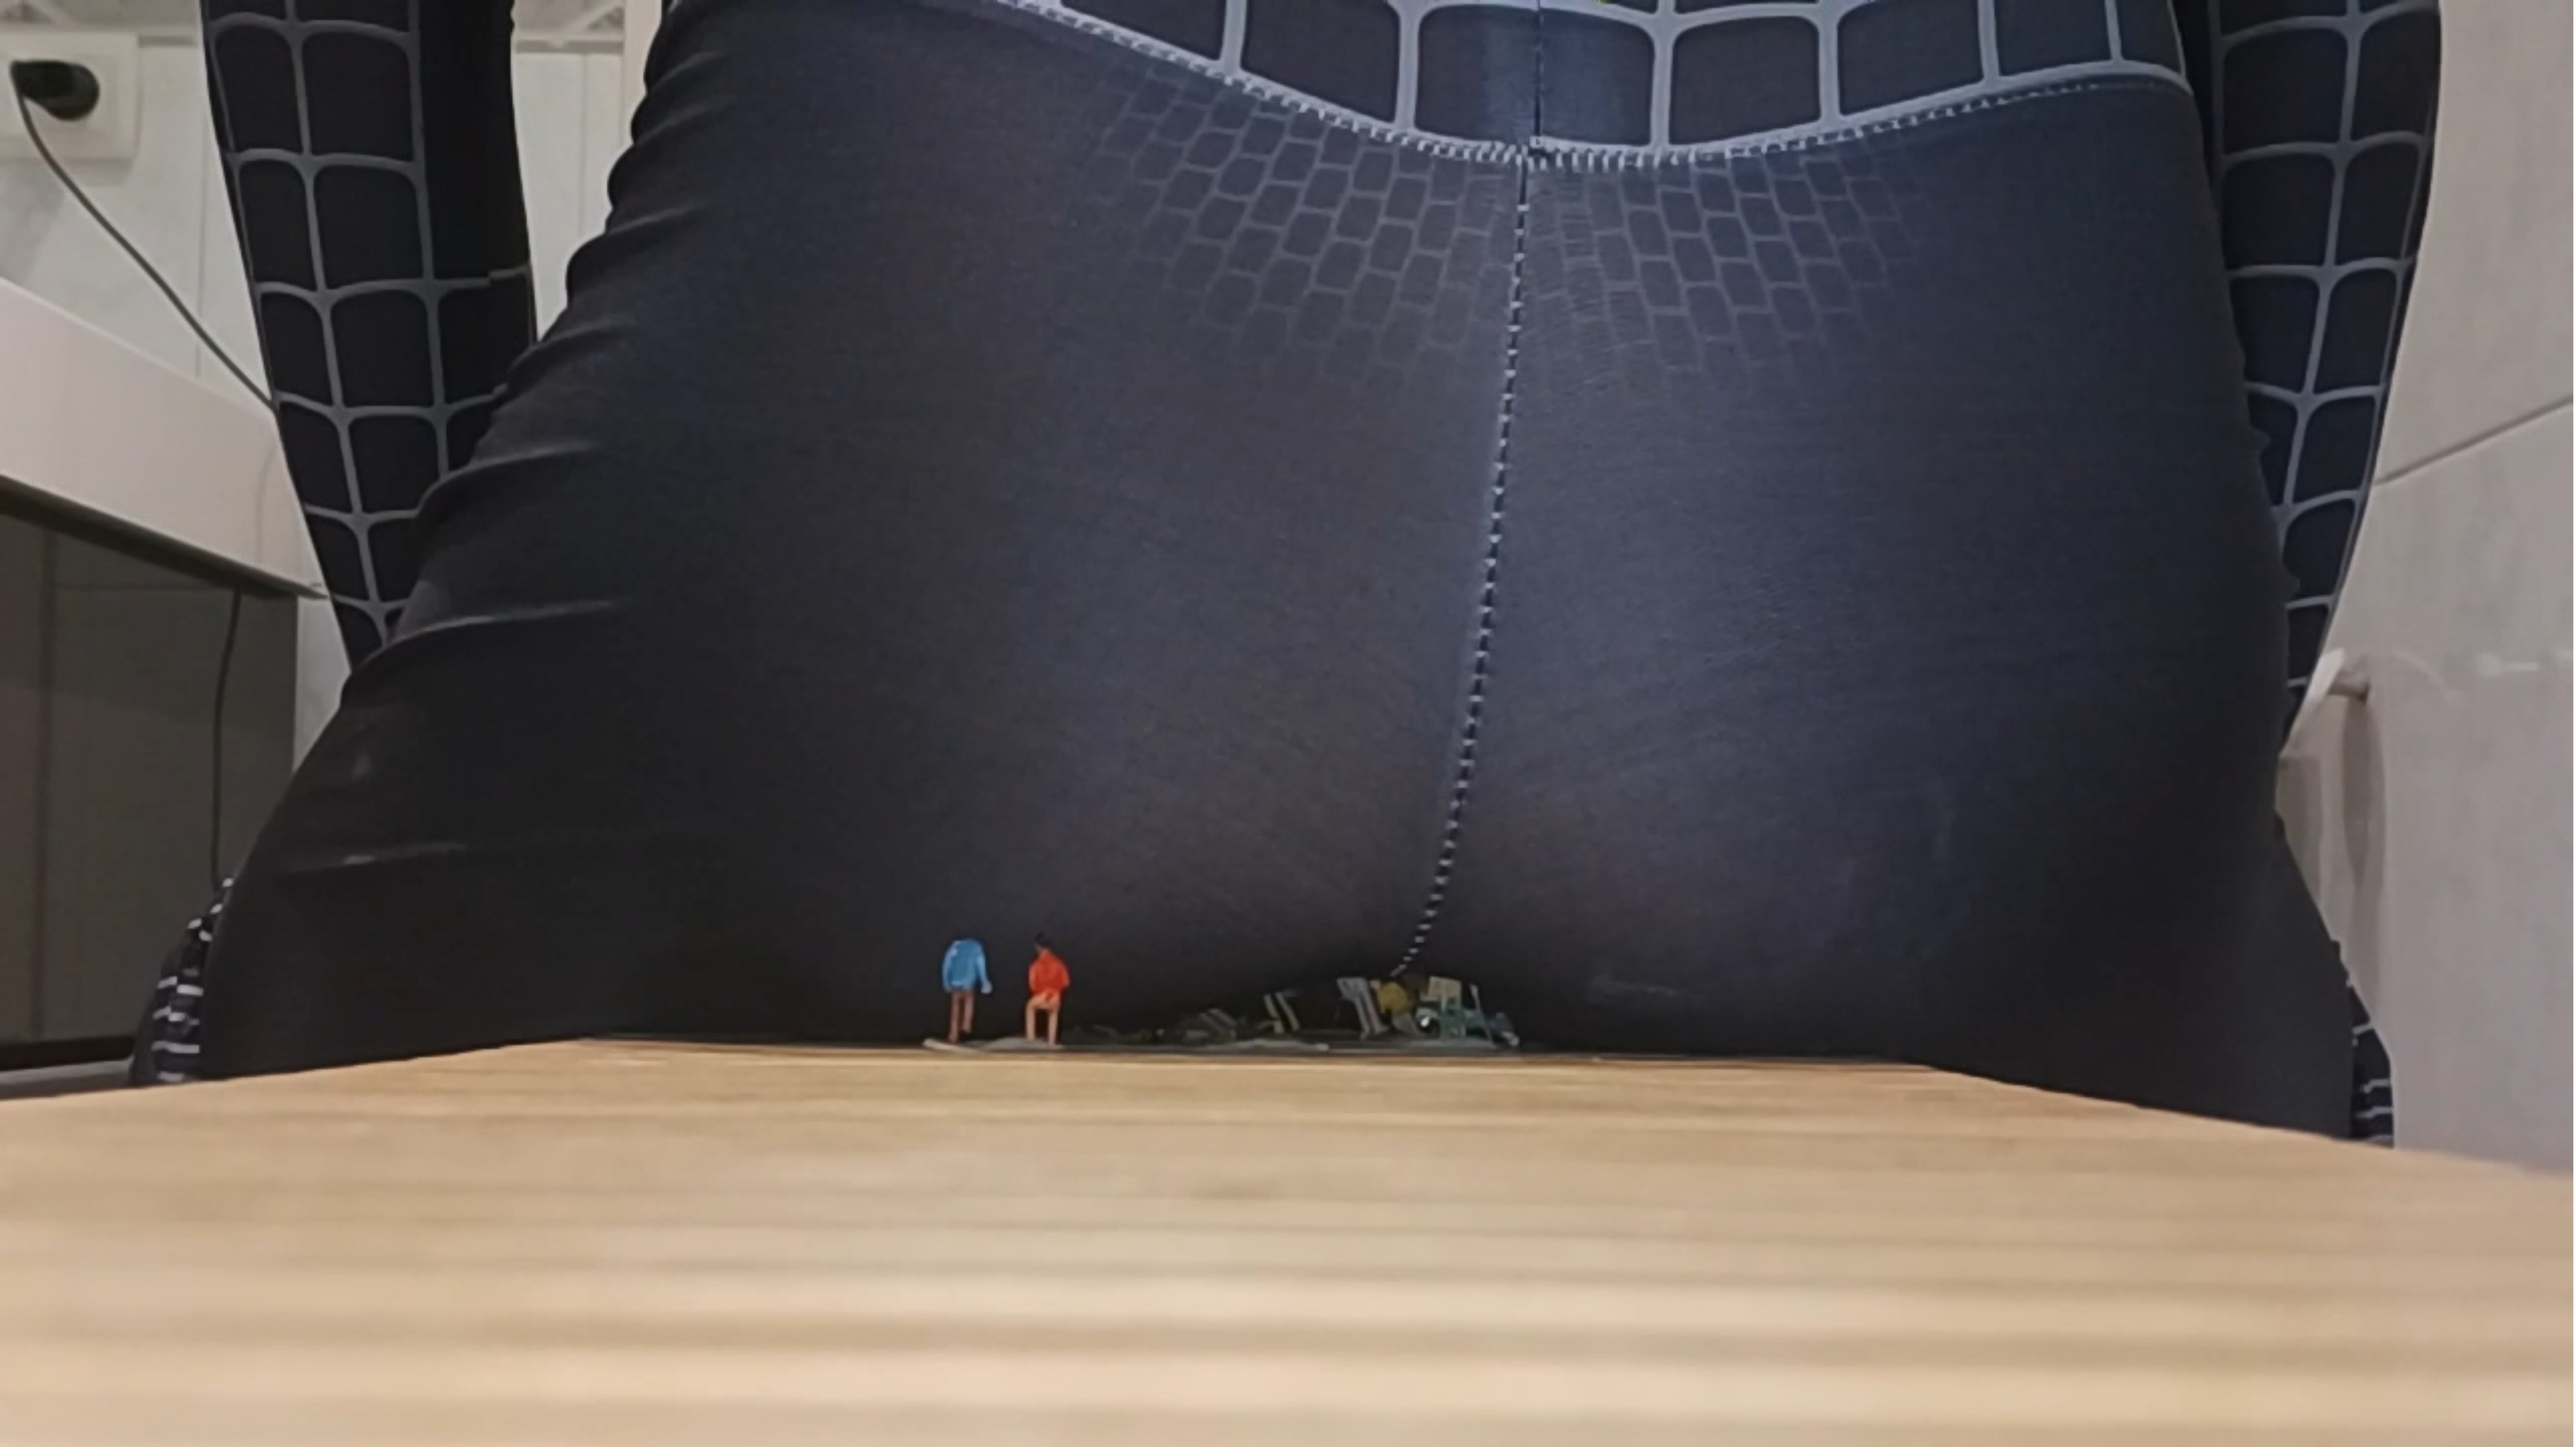 giant spiderman buttcrush tiny people part 1